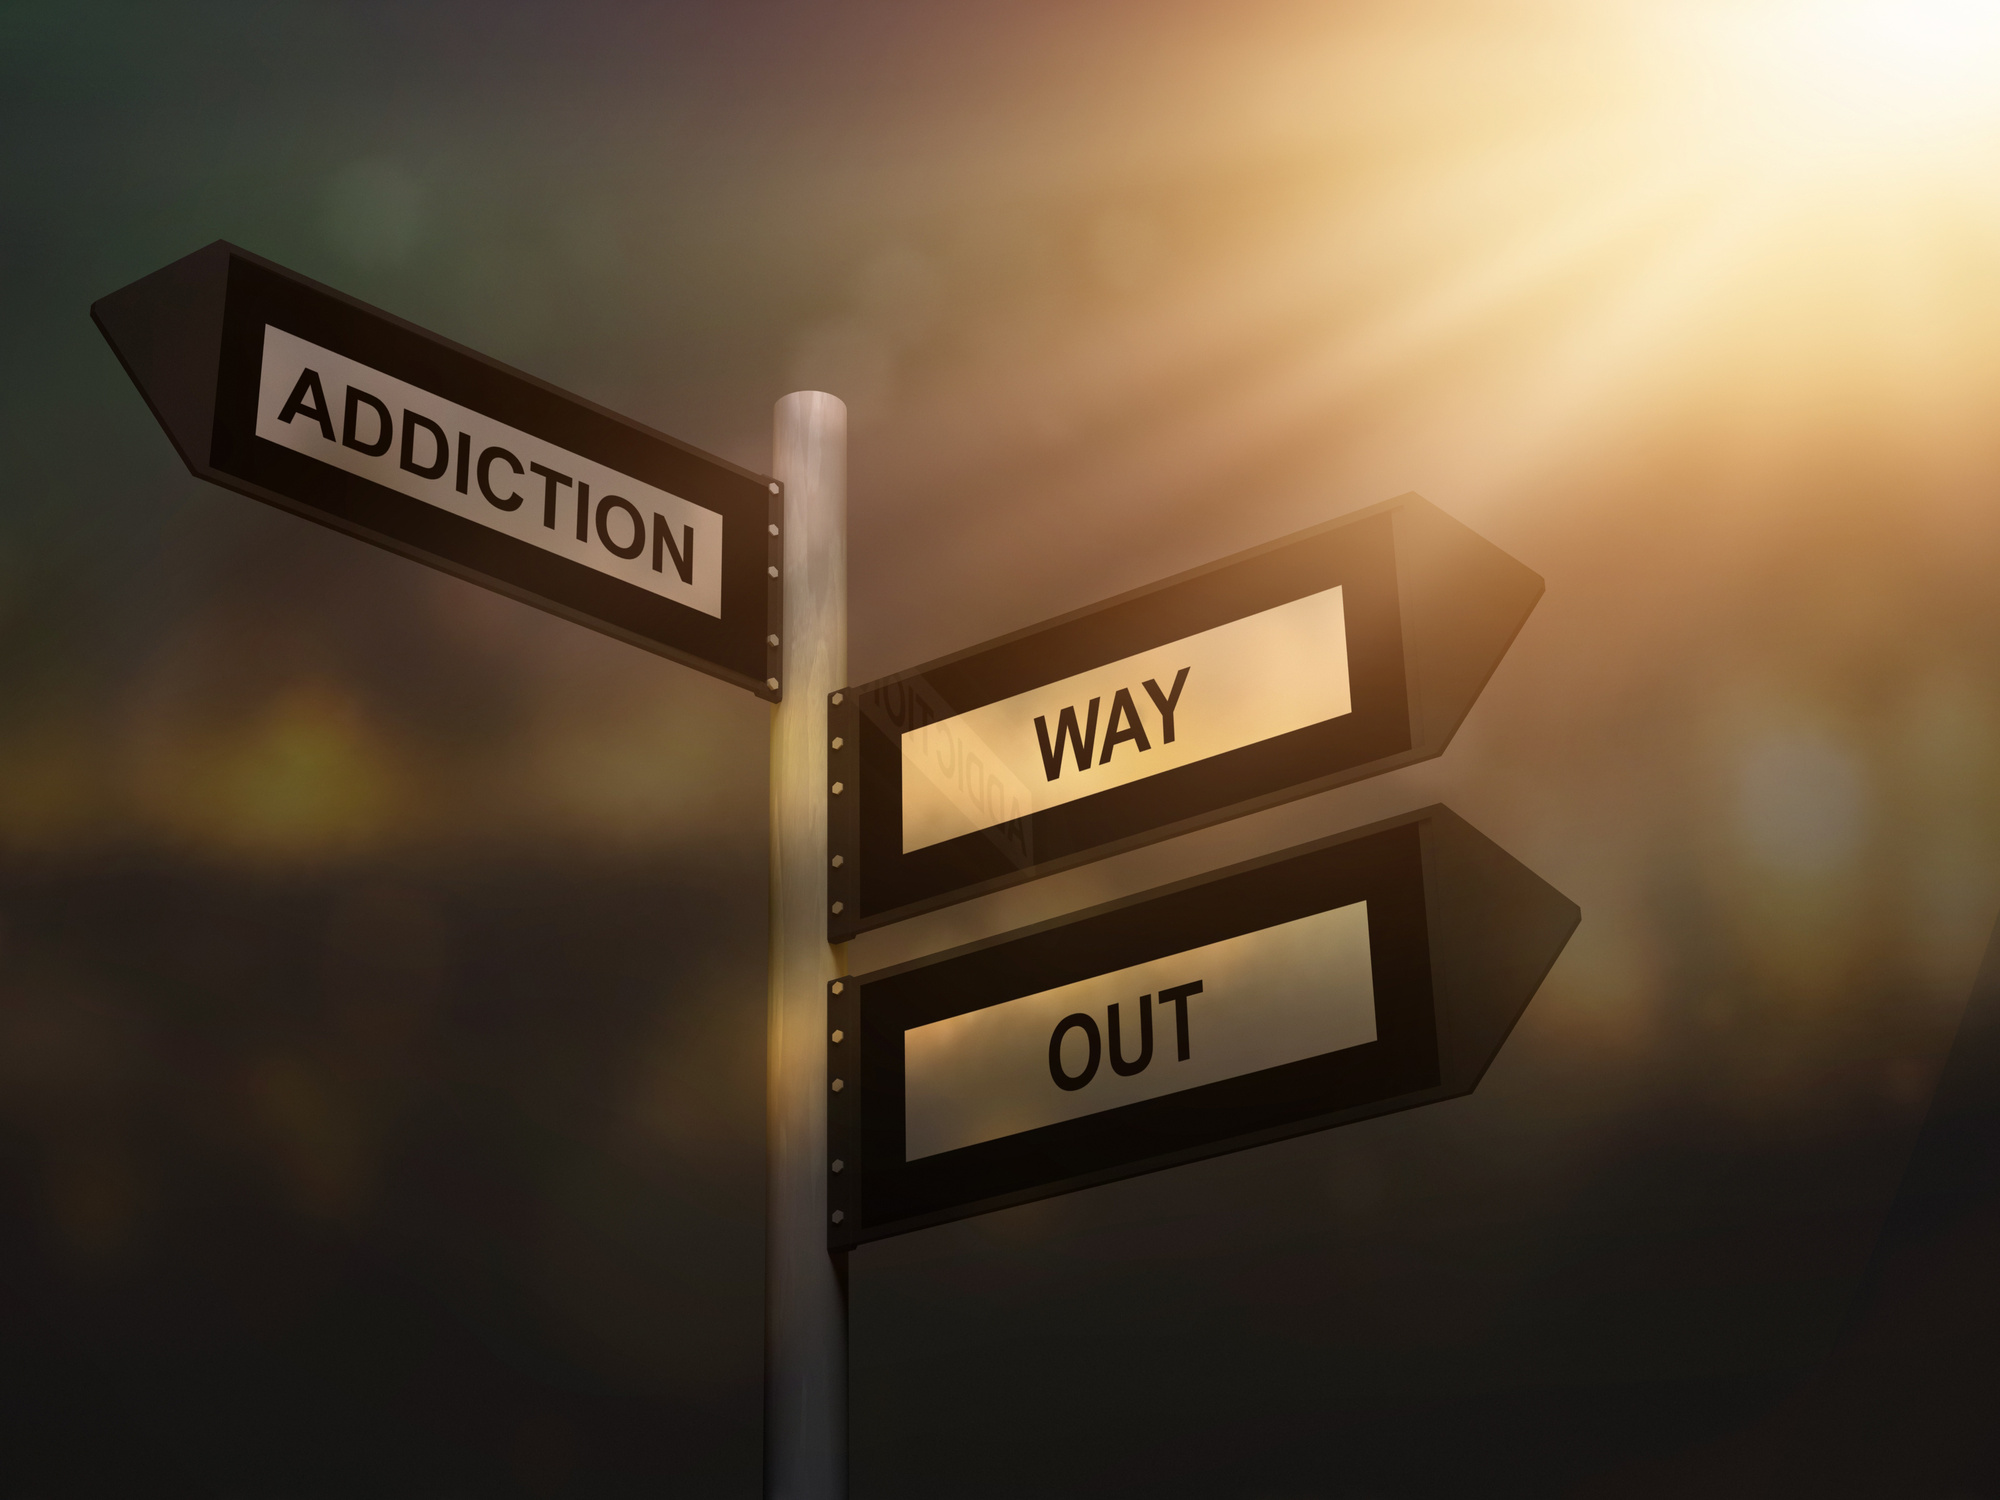 signs with addiction and way out